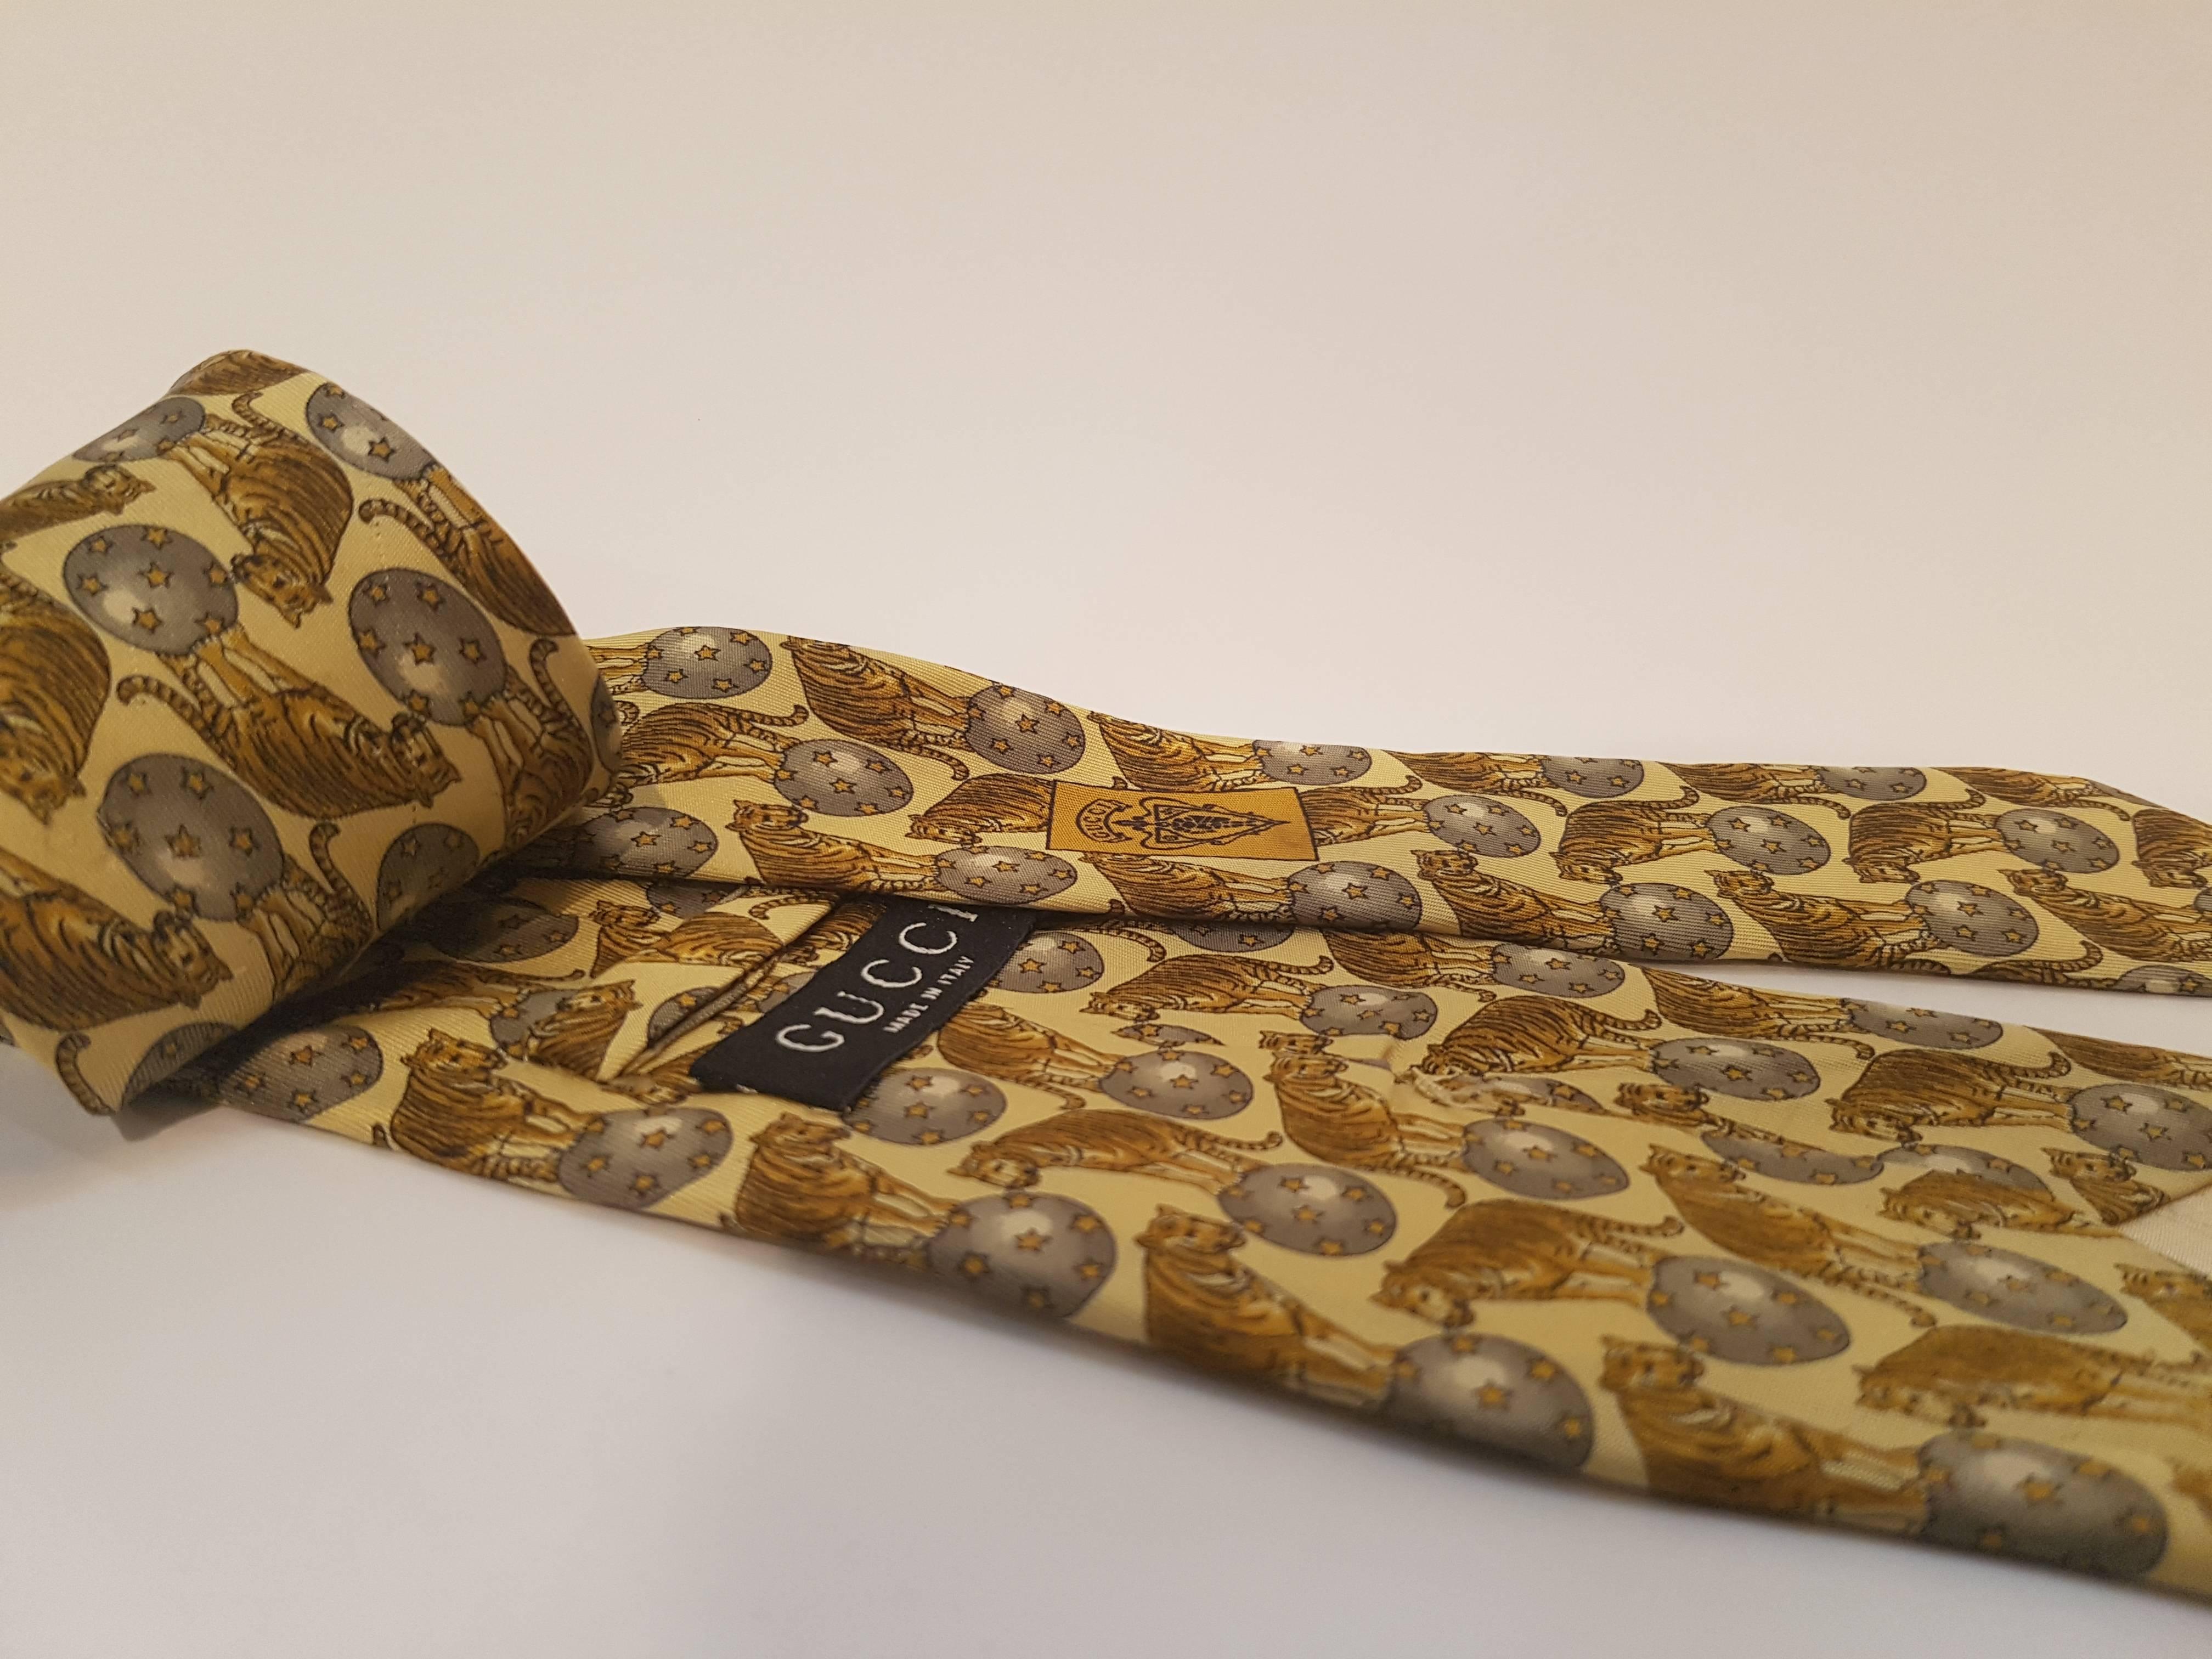 Gucci vintage tie
Light yellow tone tigers and designs on it
totally made in italy in 100% silk